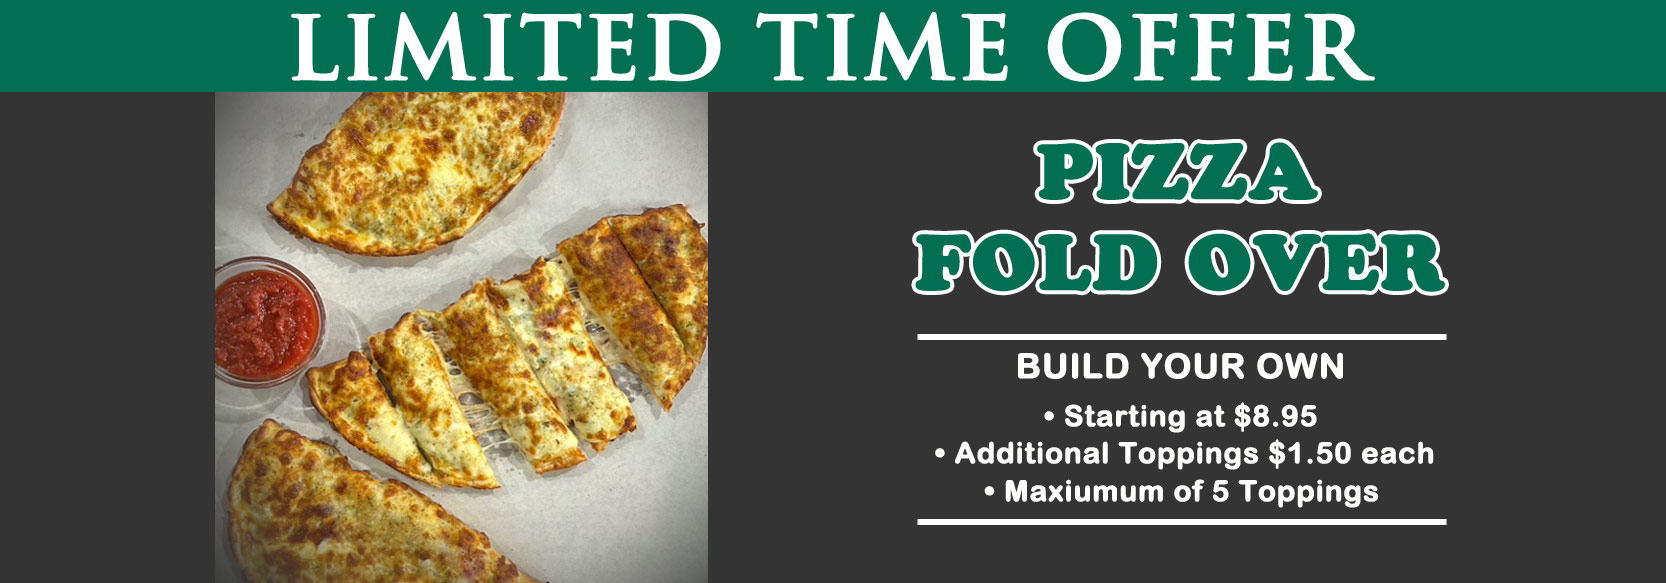 Limited Time Offer - Pizza Fold Over